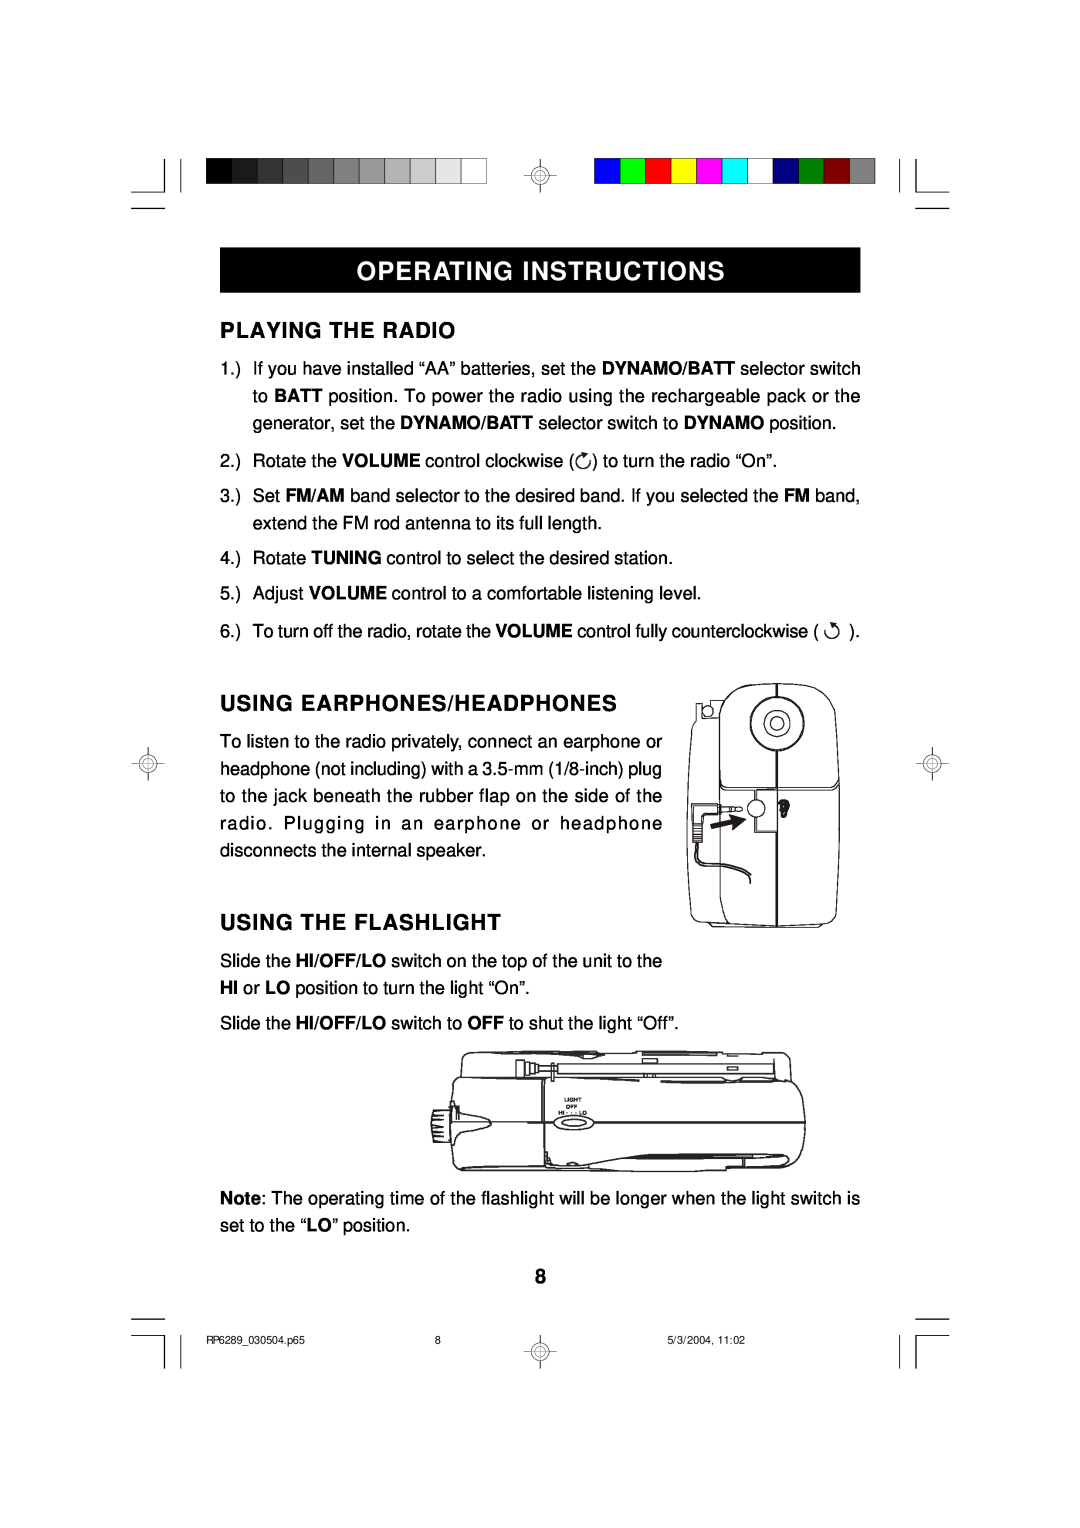 Emerson RP6289 owner manual Operating Instructions, Playing The Radio, Using Earphones/Headphones, Using The Flashlight 